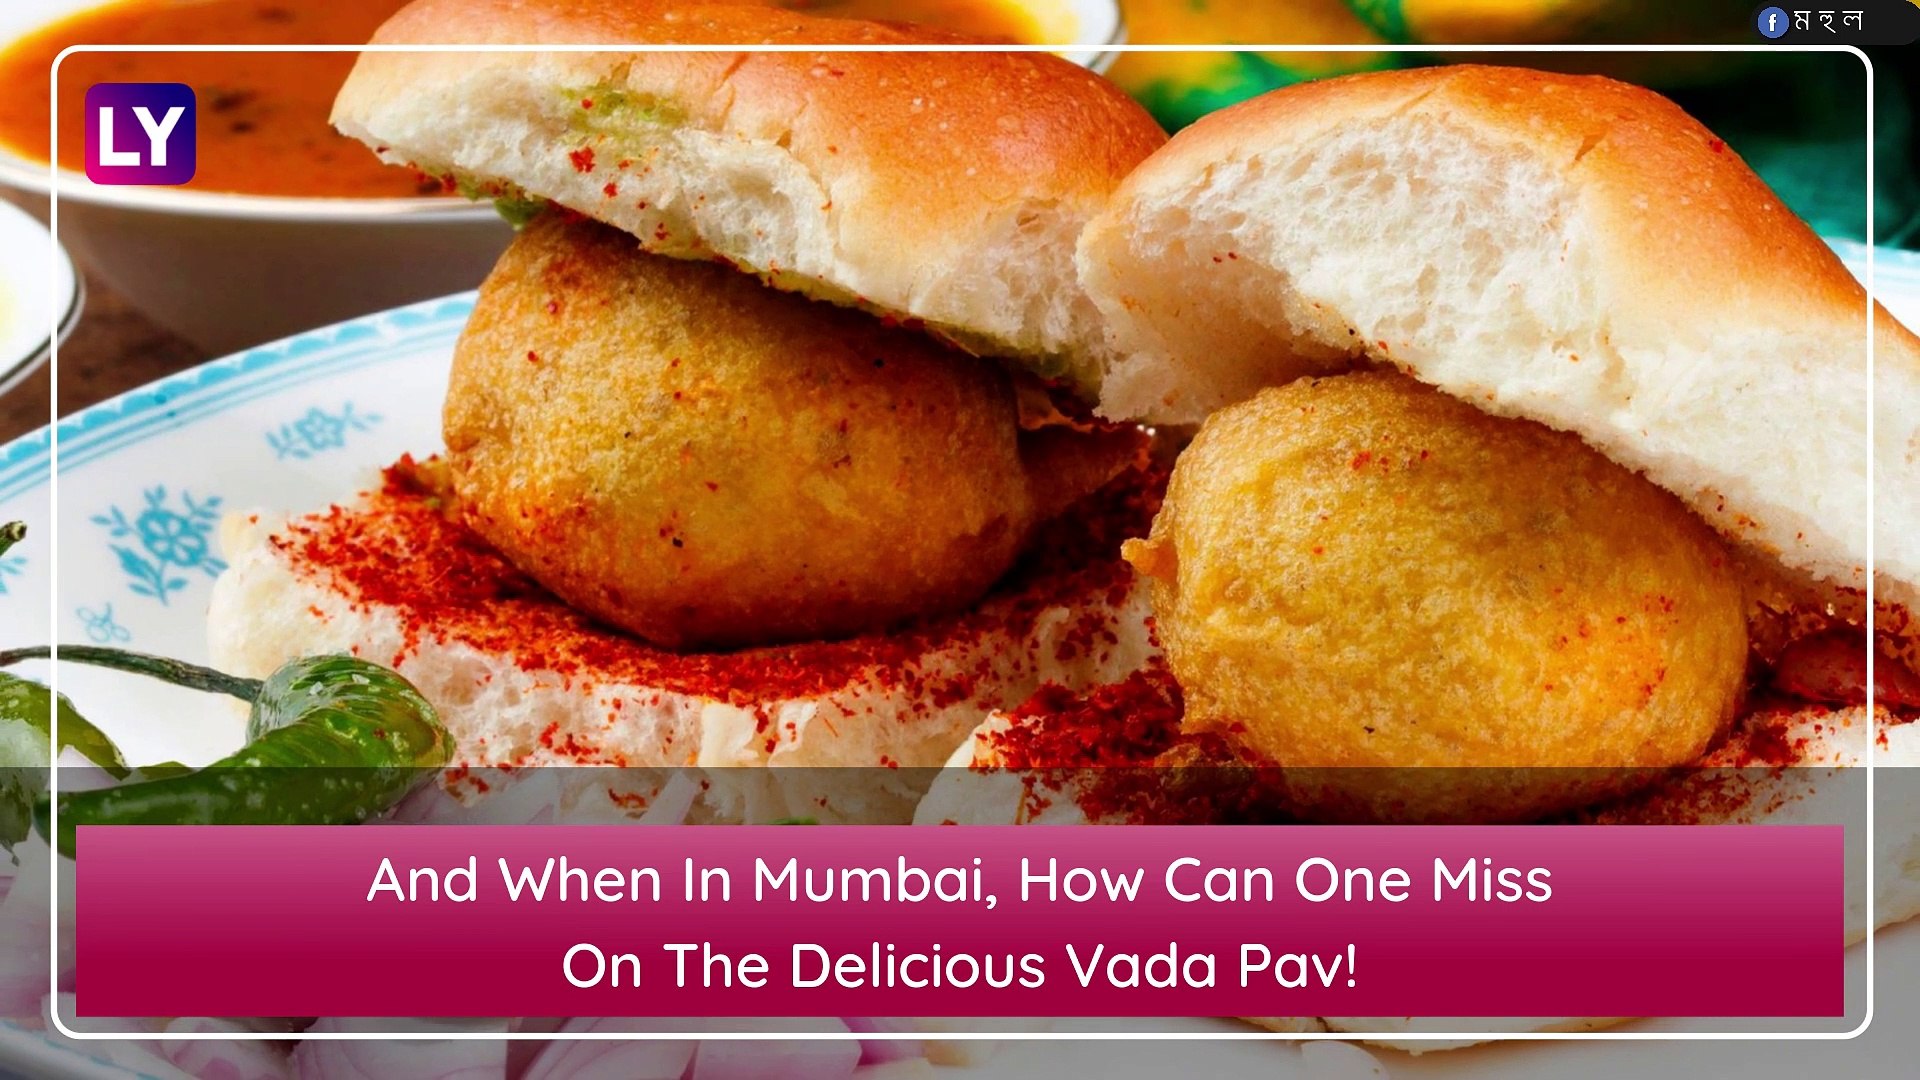 ⁣Apple CEO Tim Cook Relishes Vada Pav In Mumbai With Madhuri Dixit, Tweets ‘It Was Delicious!’